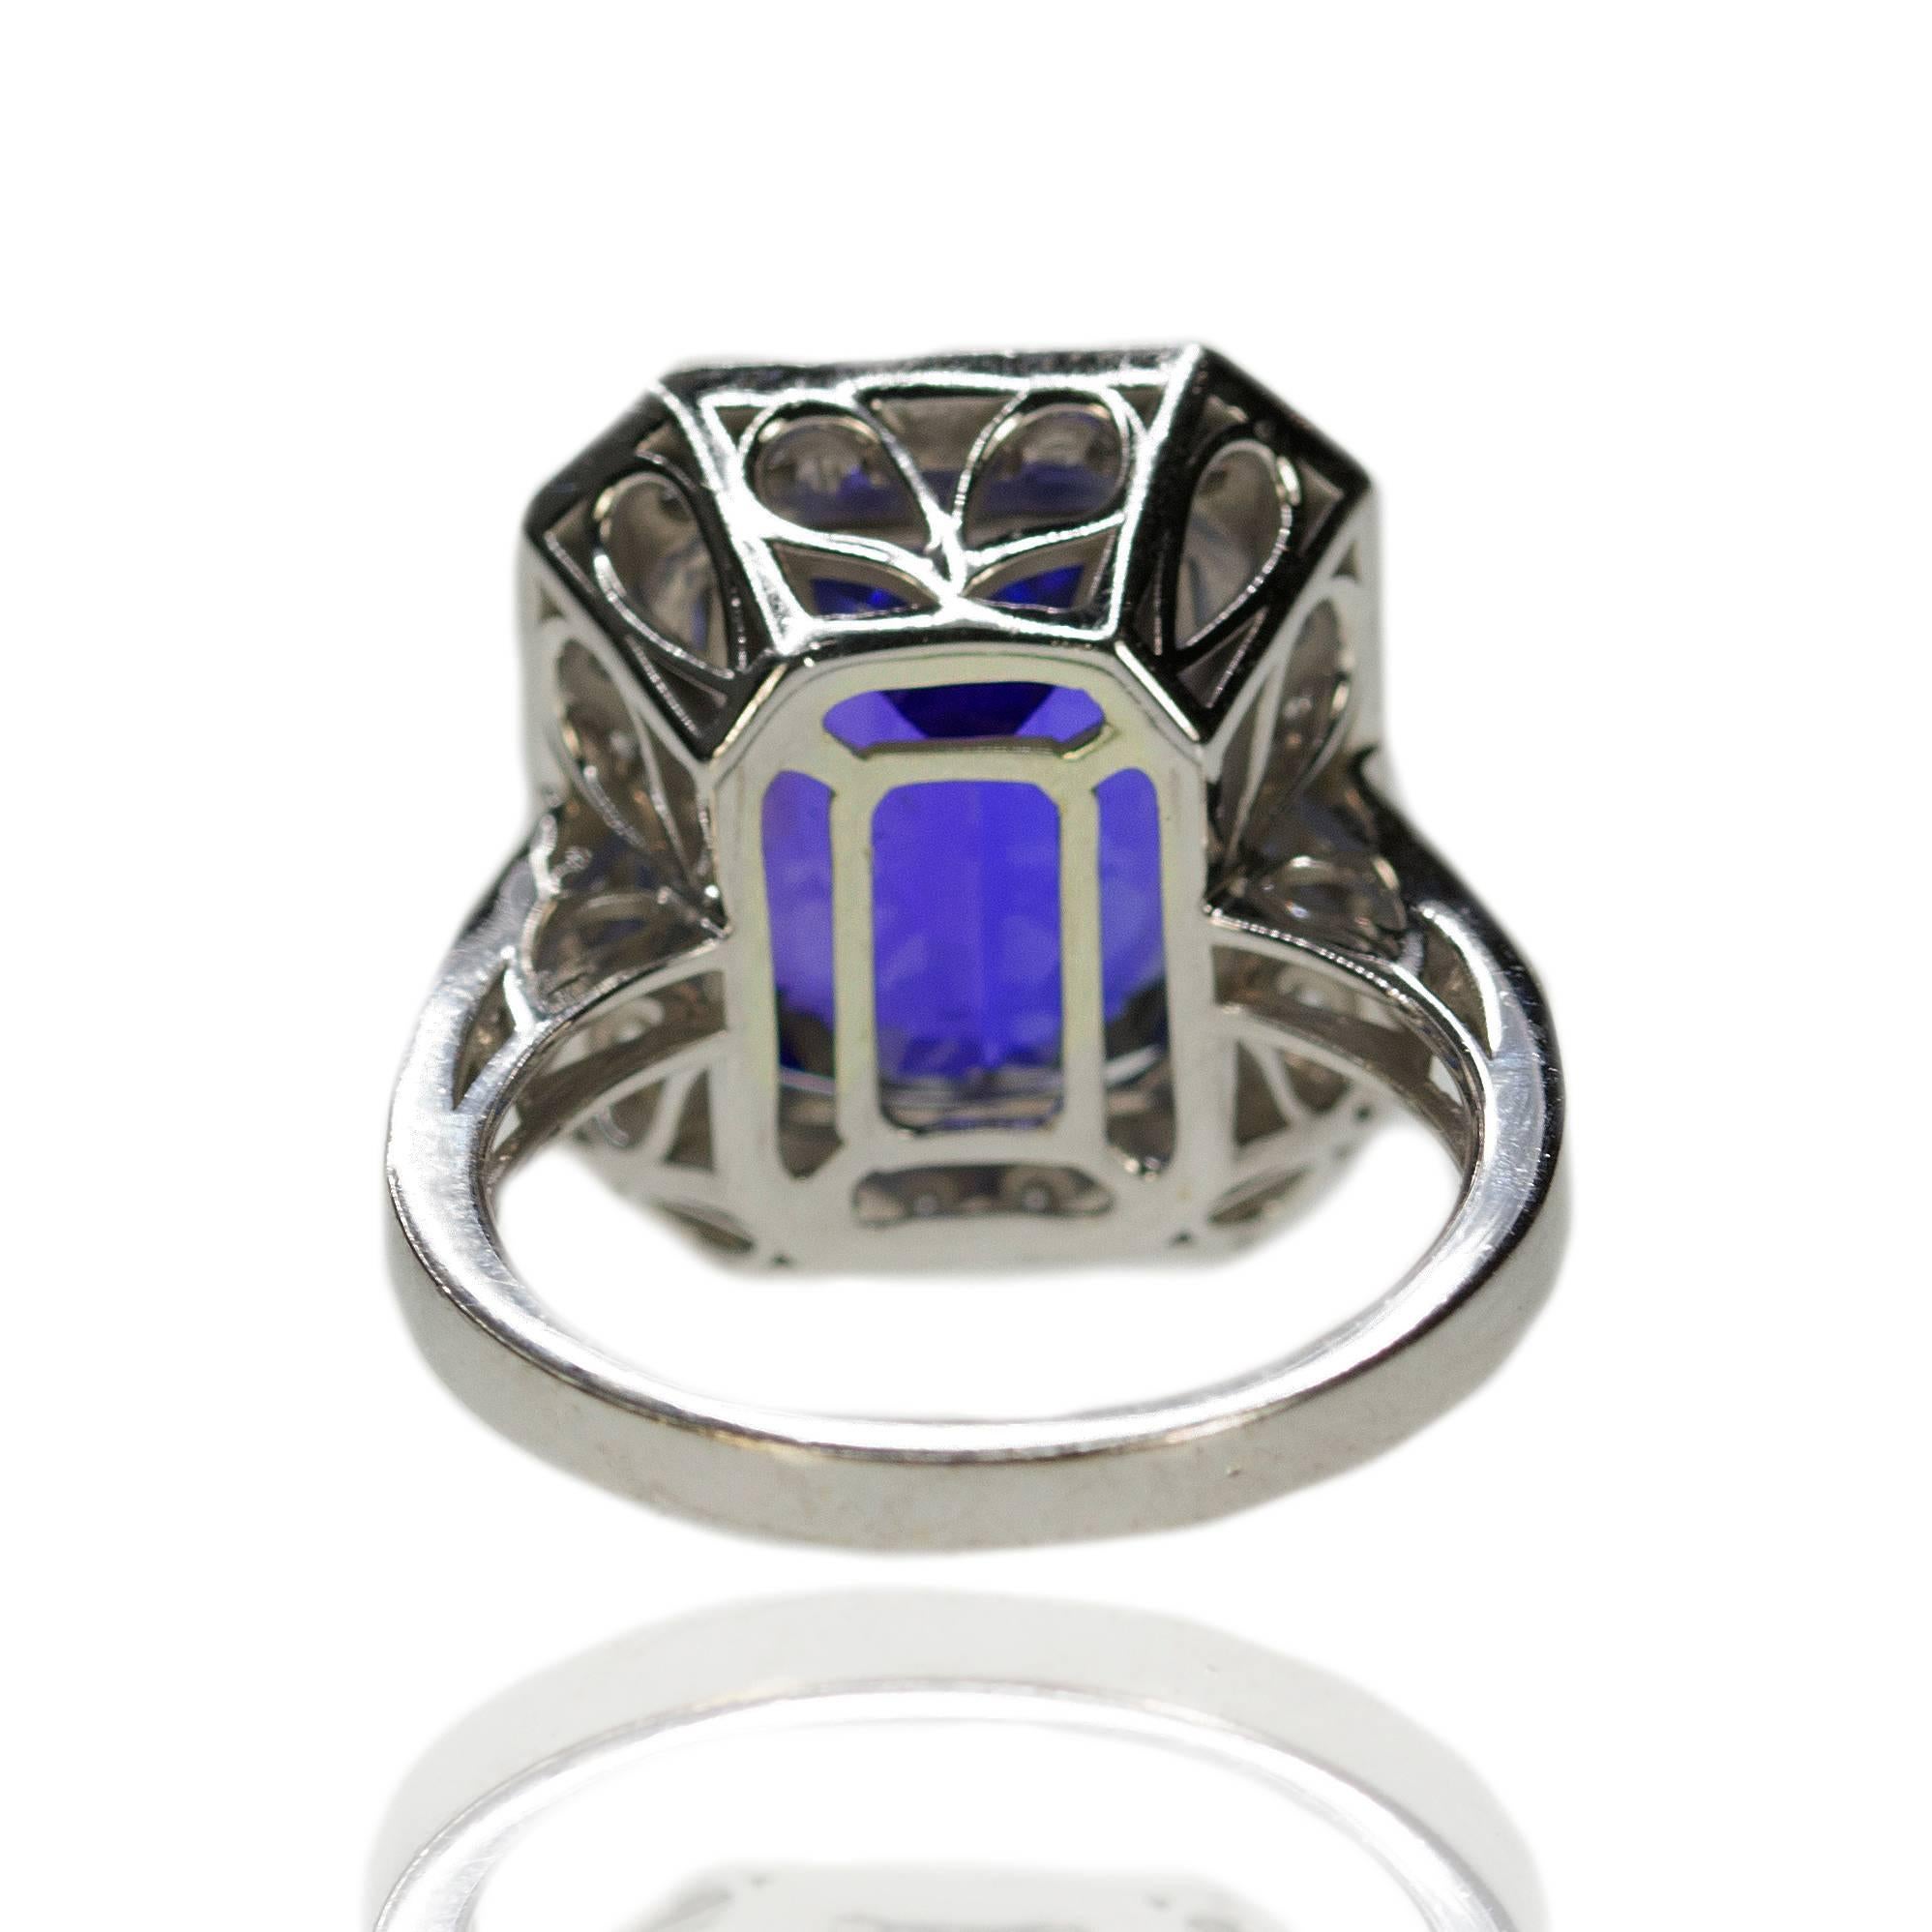 18k Ring with 9.51 carat cushion cut Tanzanite and approximately 1.00 carats of round brilliant and baguette cut diamonds. 8.91g